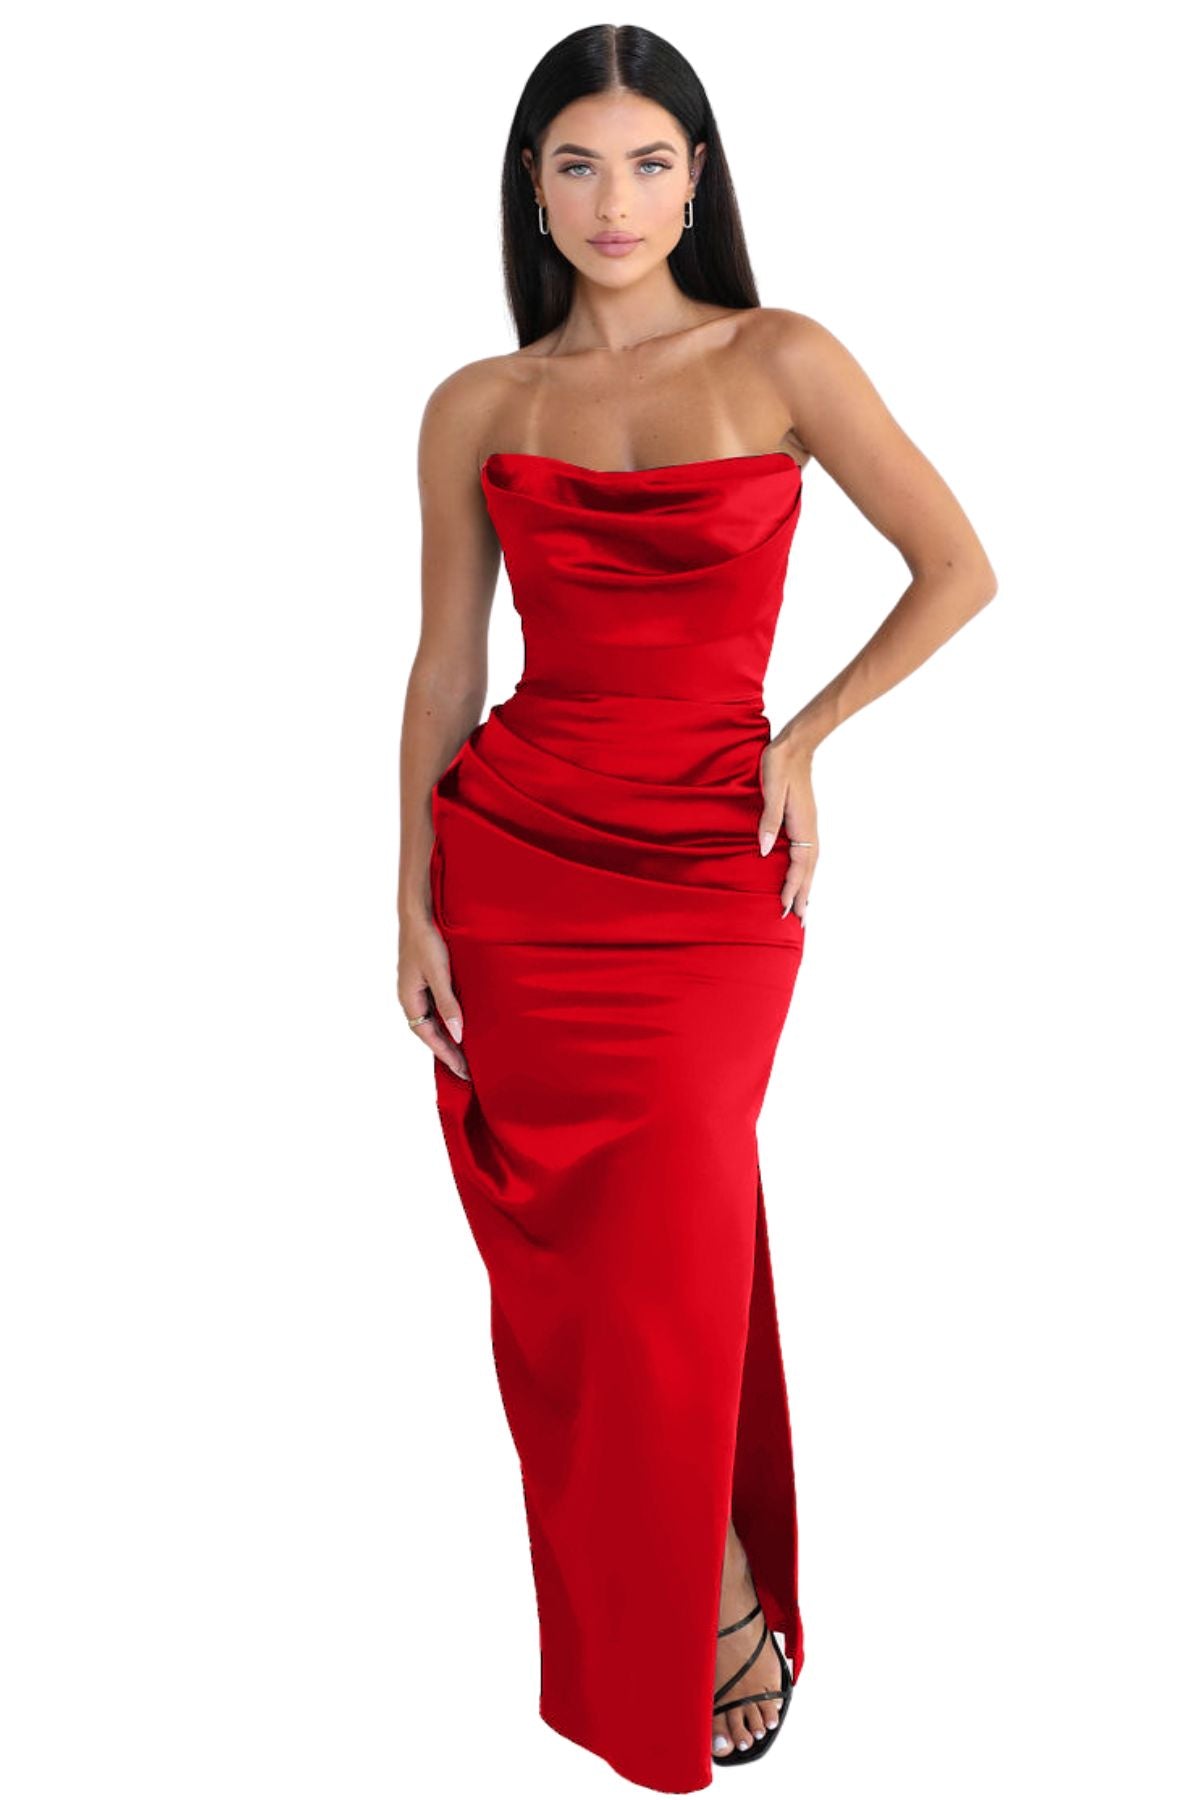 Rent HOUSE OF CB Adrienne Scarlet Satin Gown (Red)